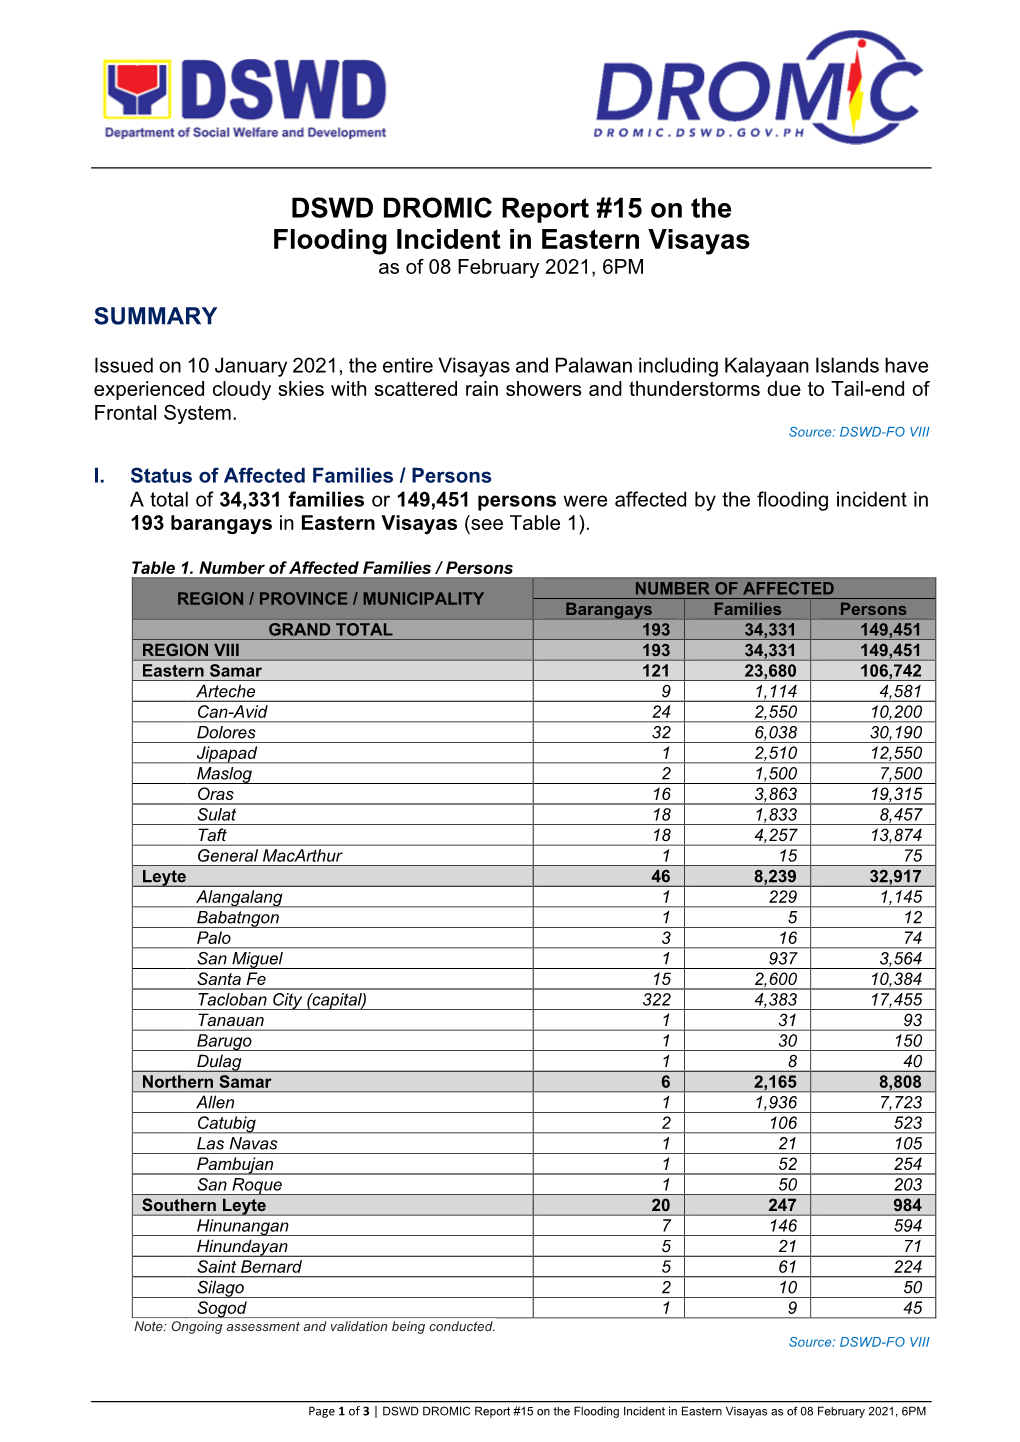 DSWD DROMIC Report #15 on the Flooding Incident in Eastern Visayas As of 08 February 2021, 6PM